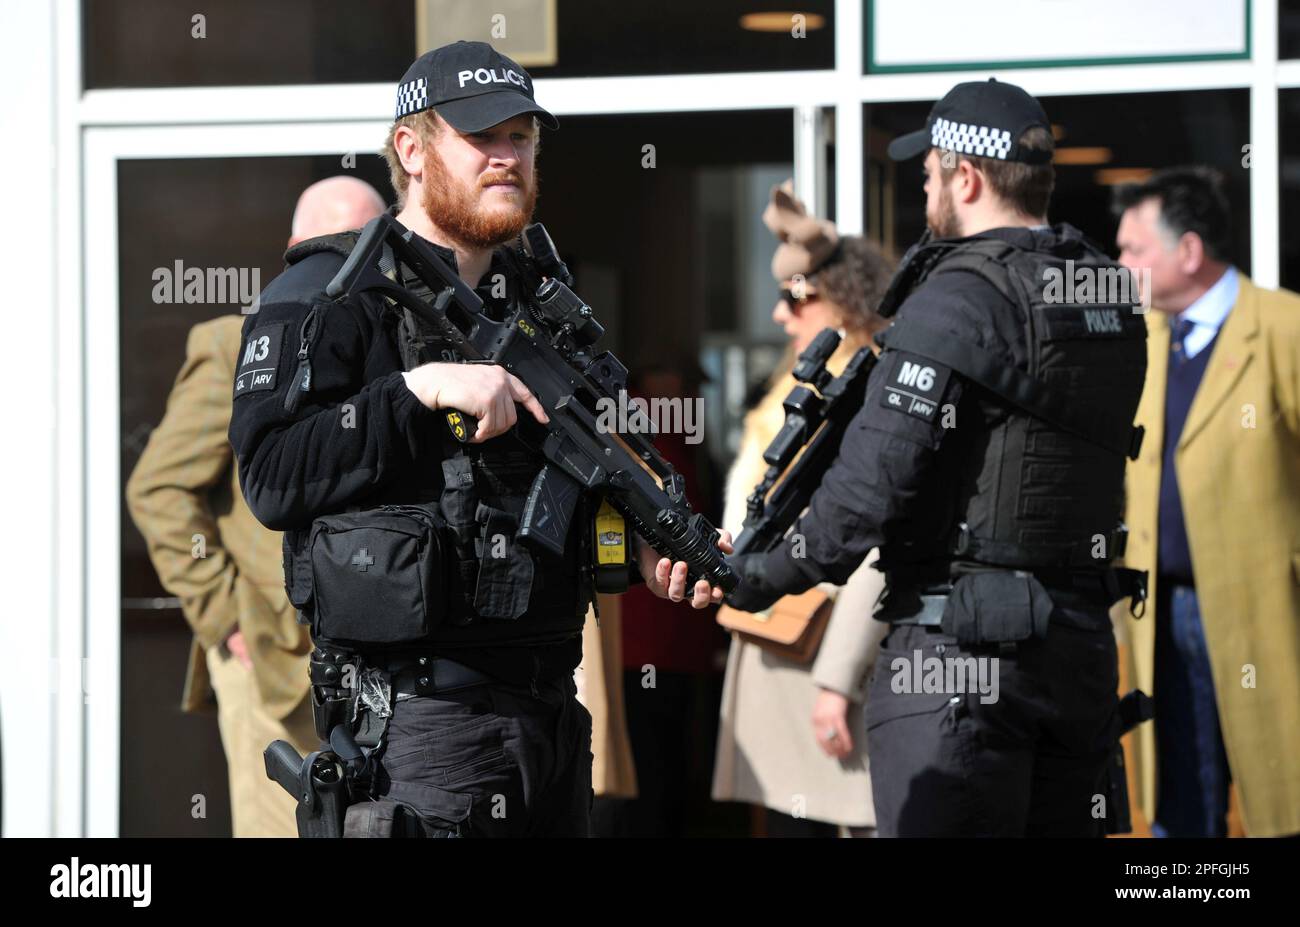 Armed police at the gate as crowds enter Cheltenham Racecourse   Horse racing at Cheltenham Racecourse on Day 4 the final day of the Cheltenham Festiv Stock Photo